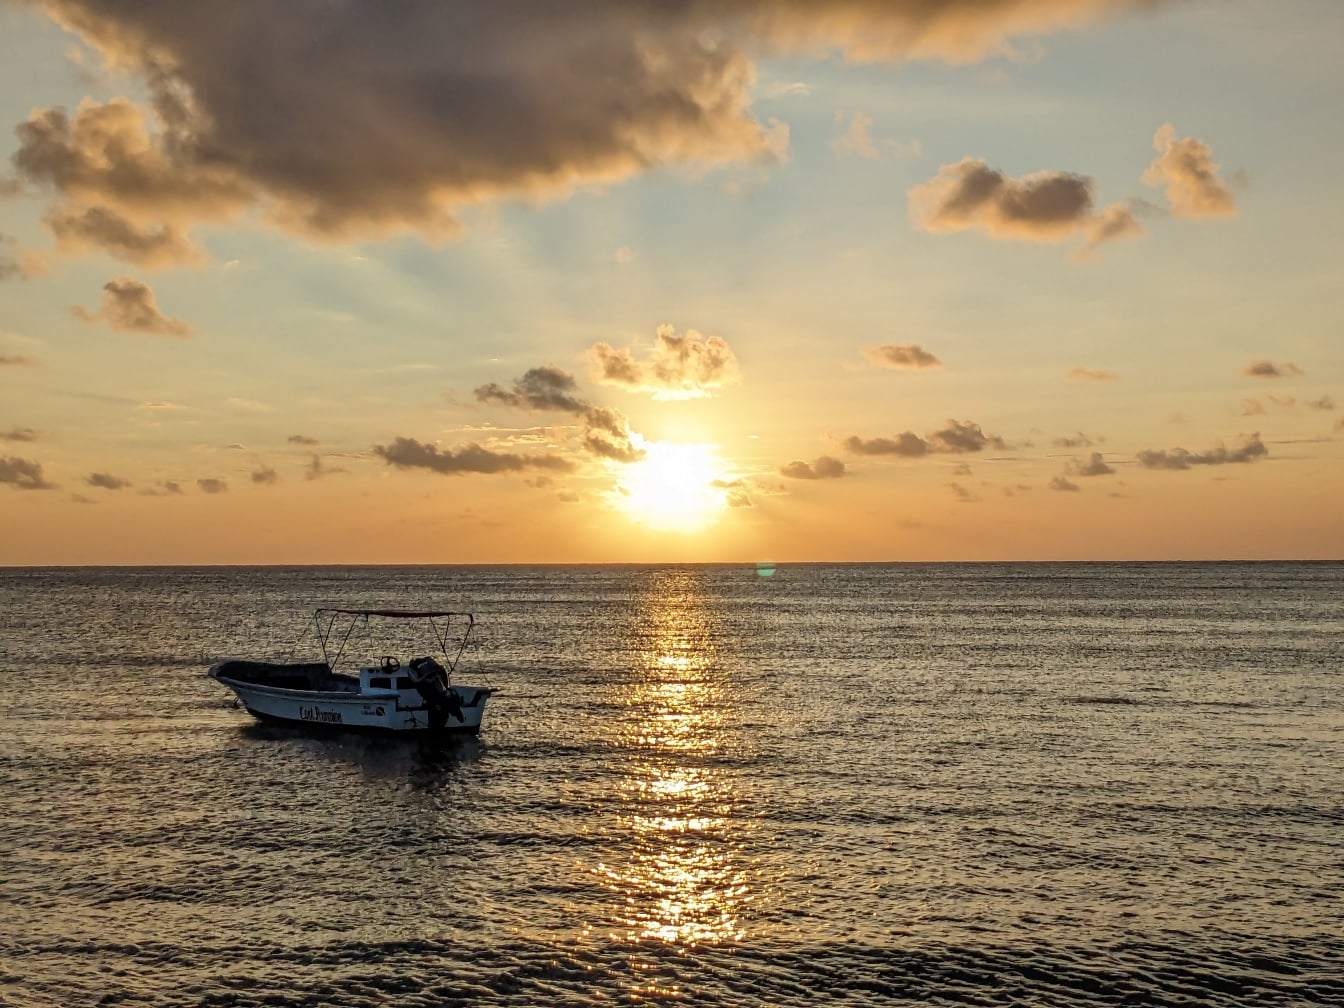 Small boat on sea with bright sunrays reflected on sea horizon at sunrise